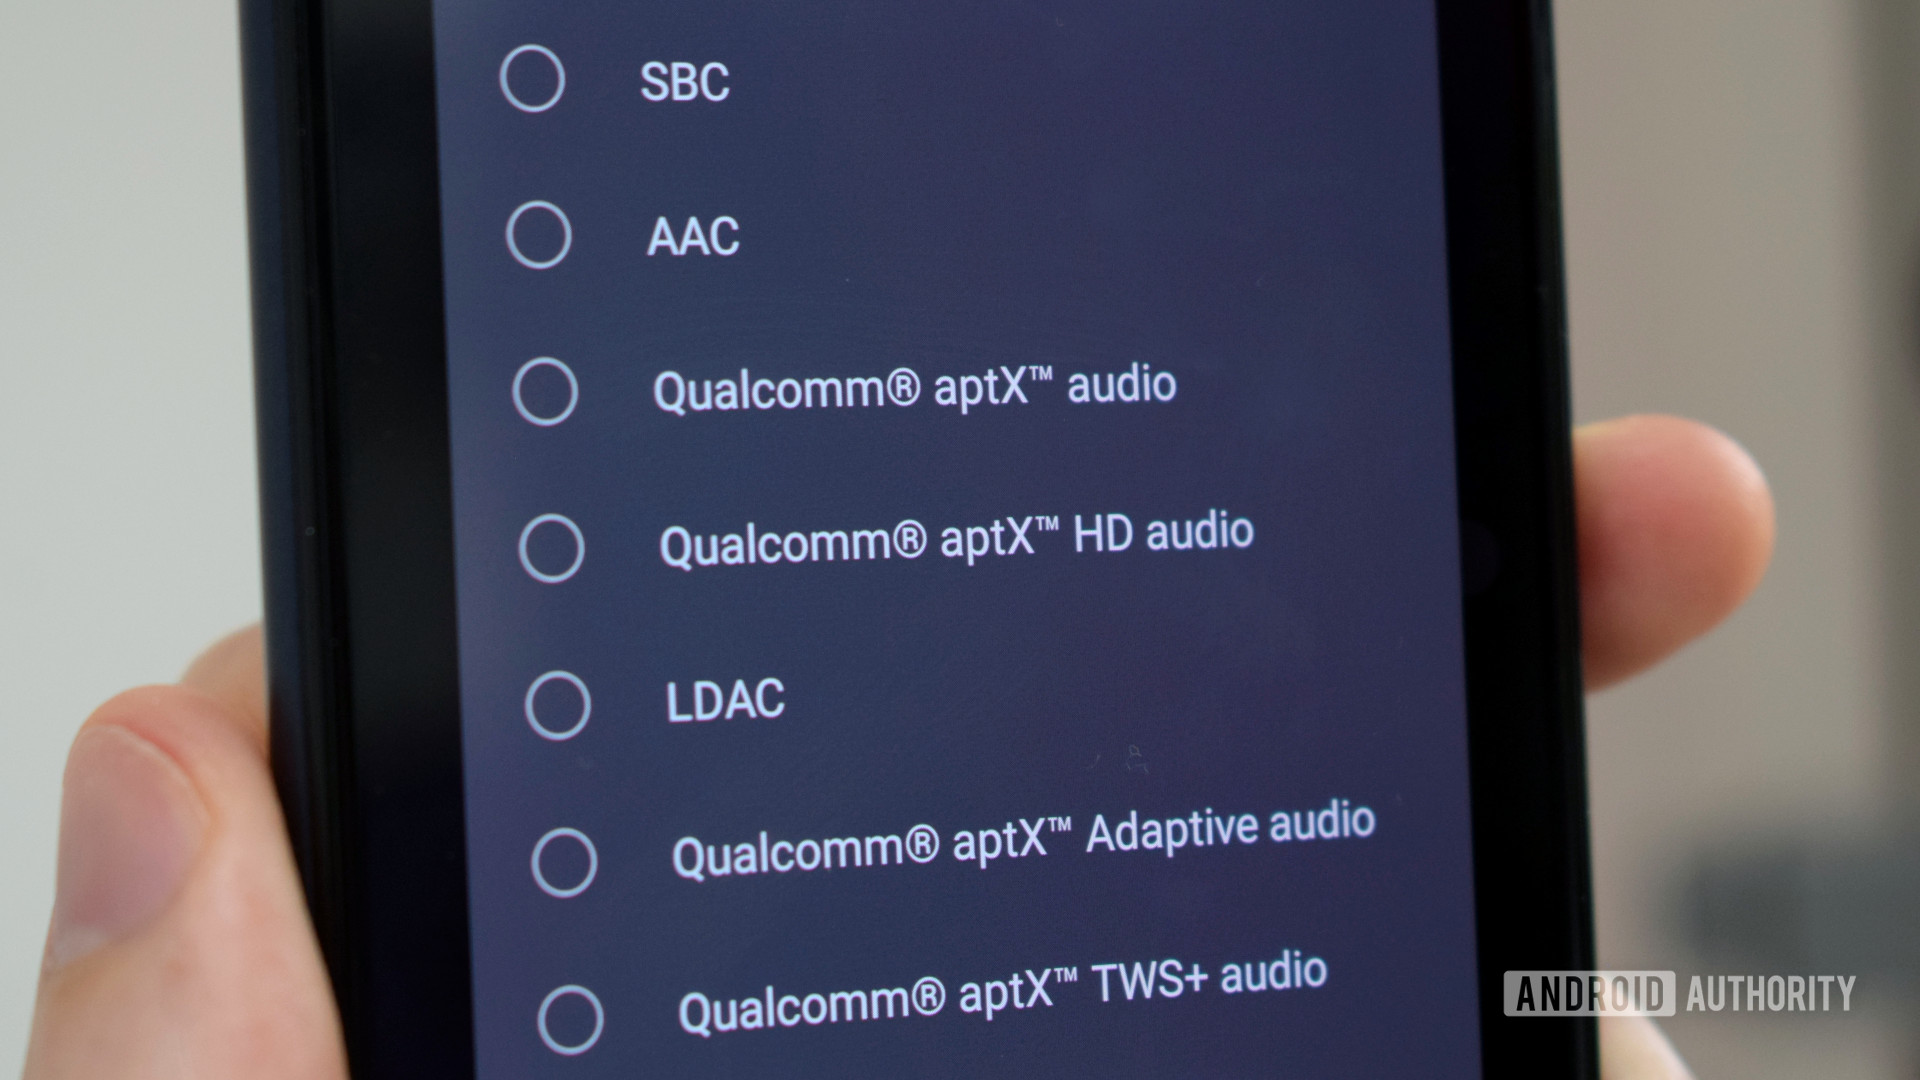 Bluetooth audio codec list in the Android settings menu